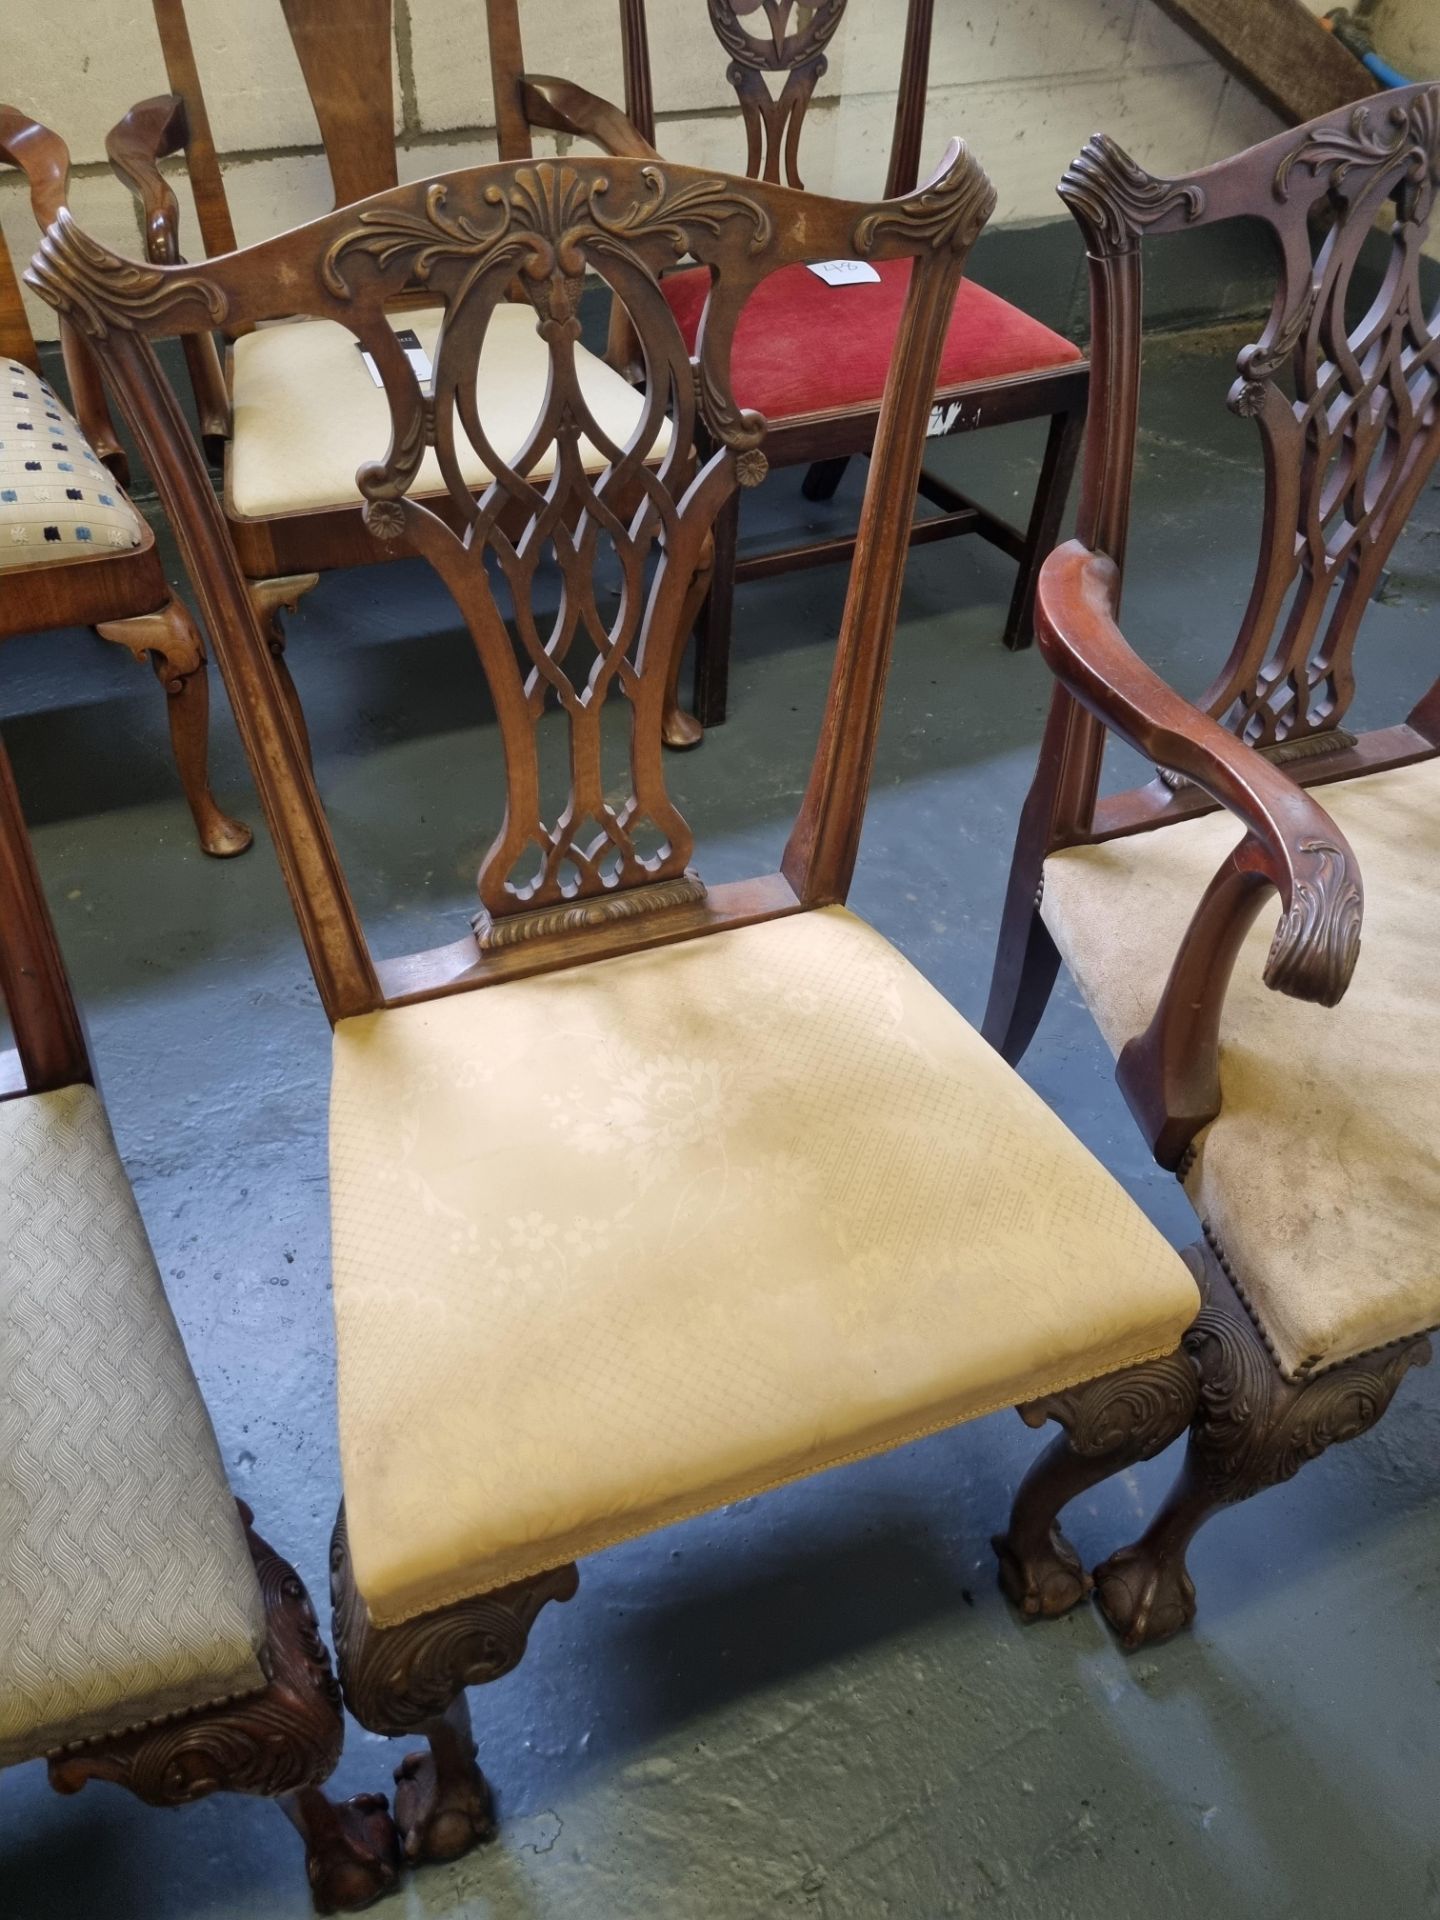 3 X Arthur Brett Mid-Georgian-Style Carved Mahogany Upholstered Dining Chairs With Brown - Image 3 of 5